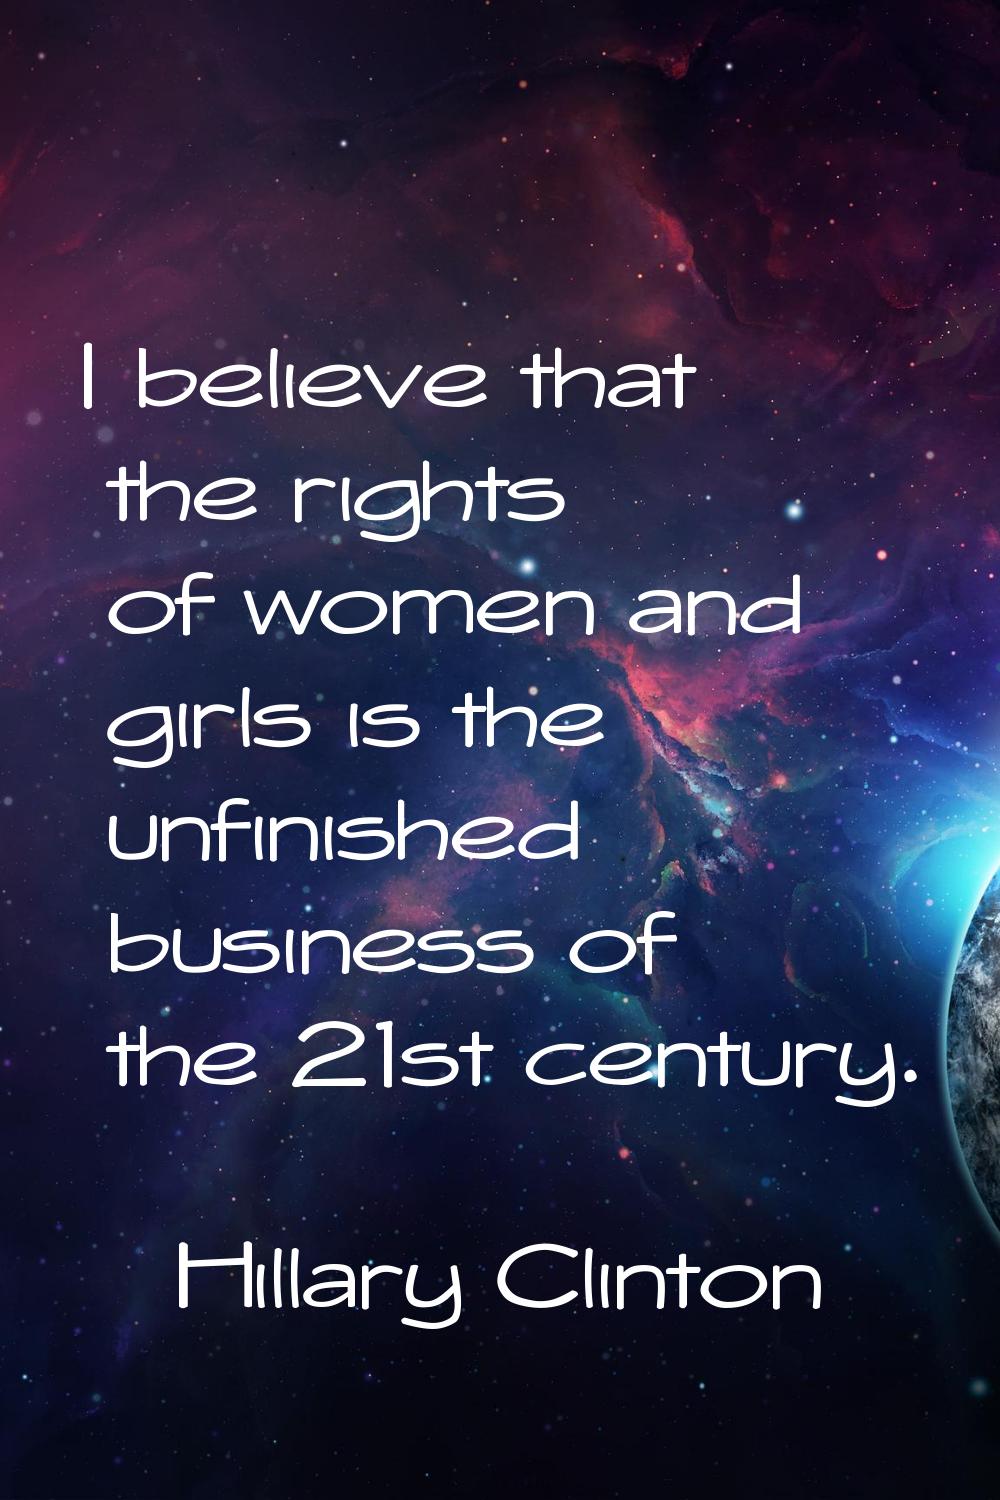 I believe that the rights of women and girls is the unfinished business of the 21st century.